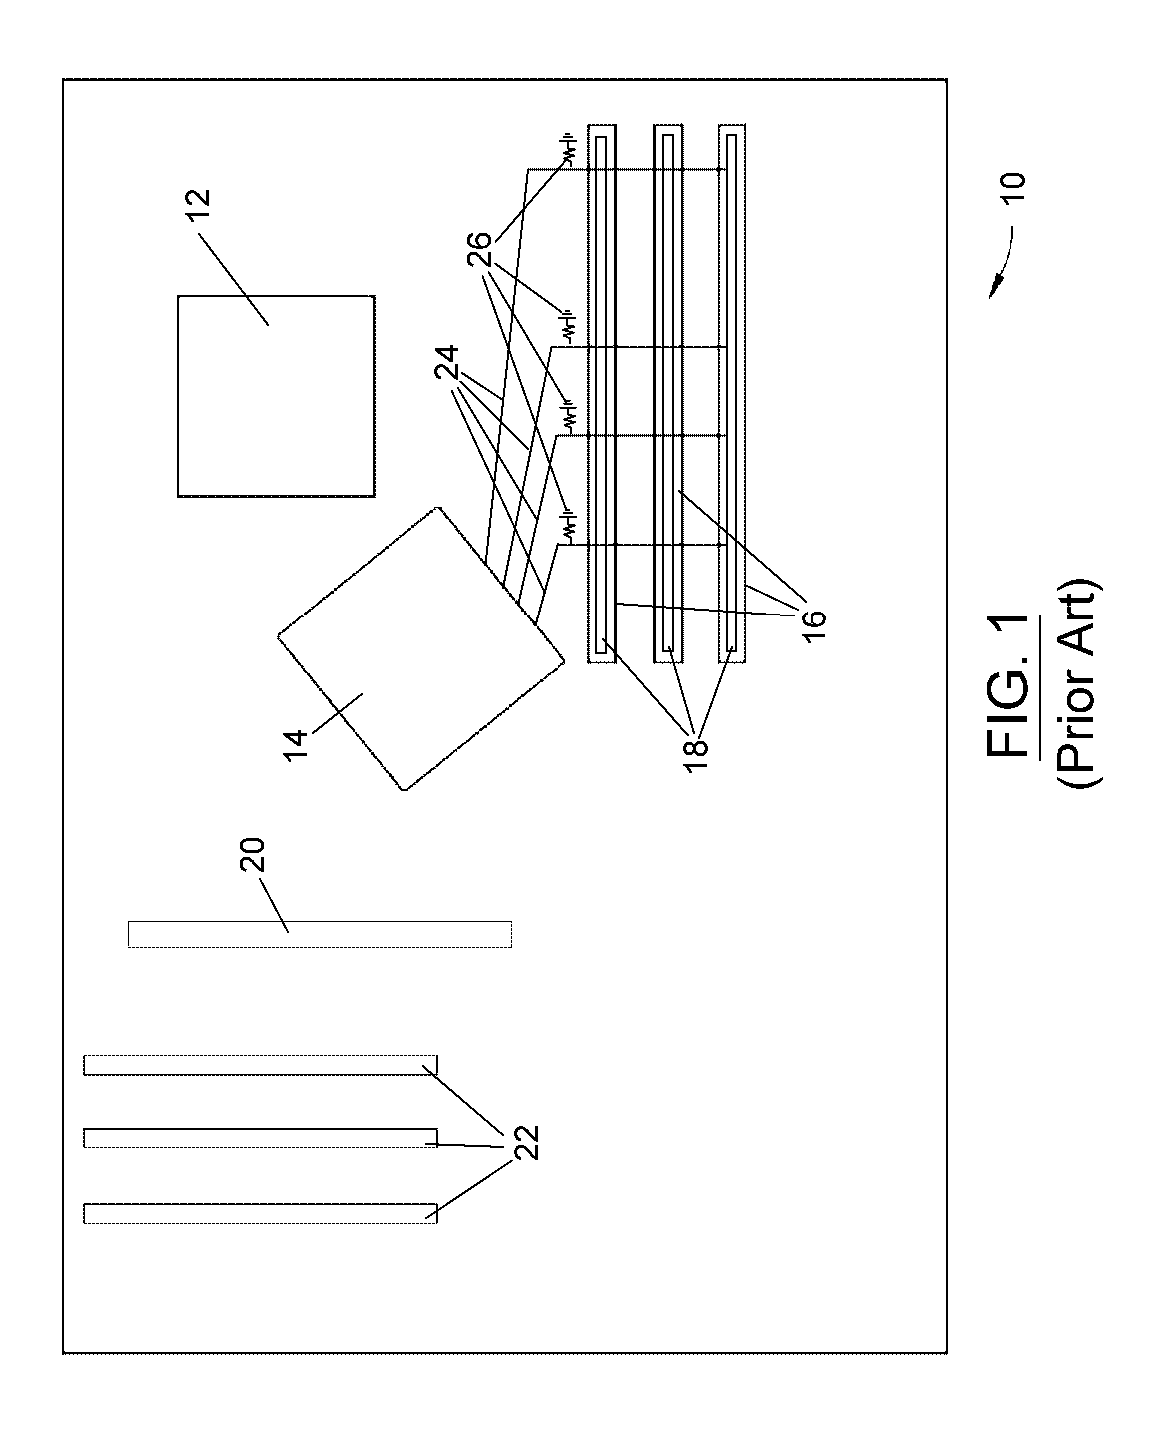 Method for increasing frequency yield of memory chips through on-chip or on-module termination